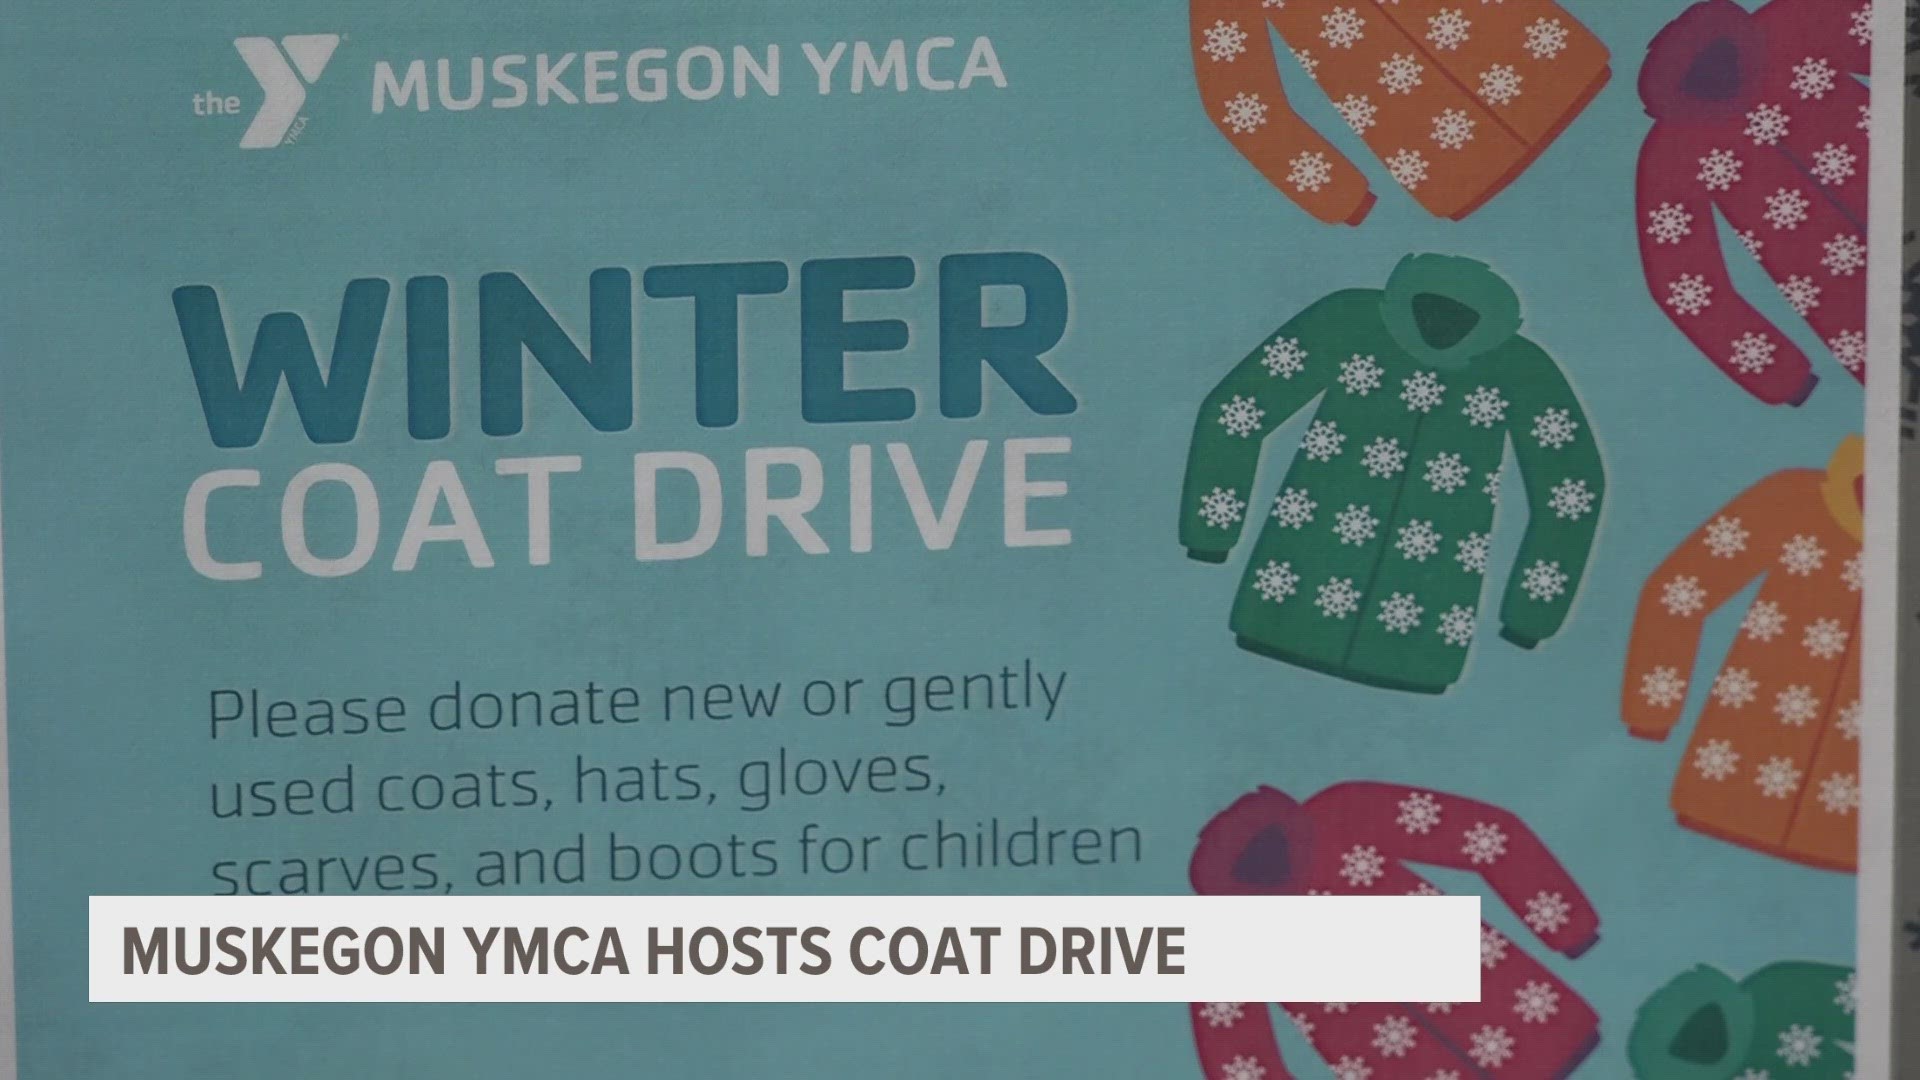 The Muskegon YMCA is looking for child sized winter gear to give to students in need at area schools.